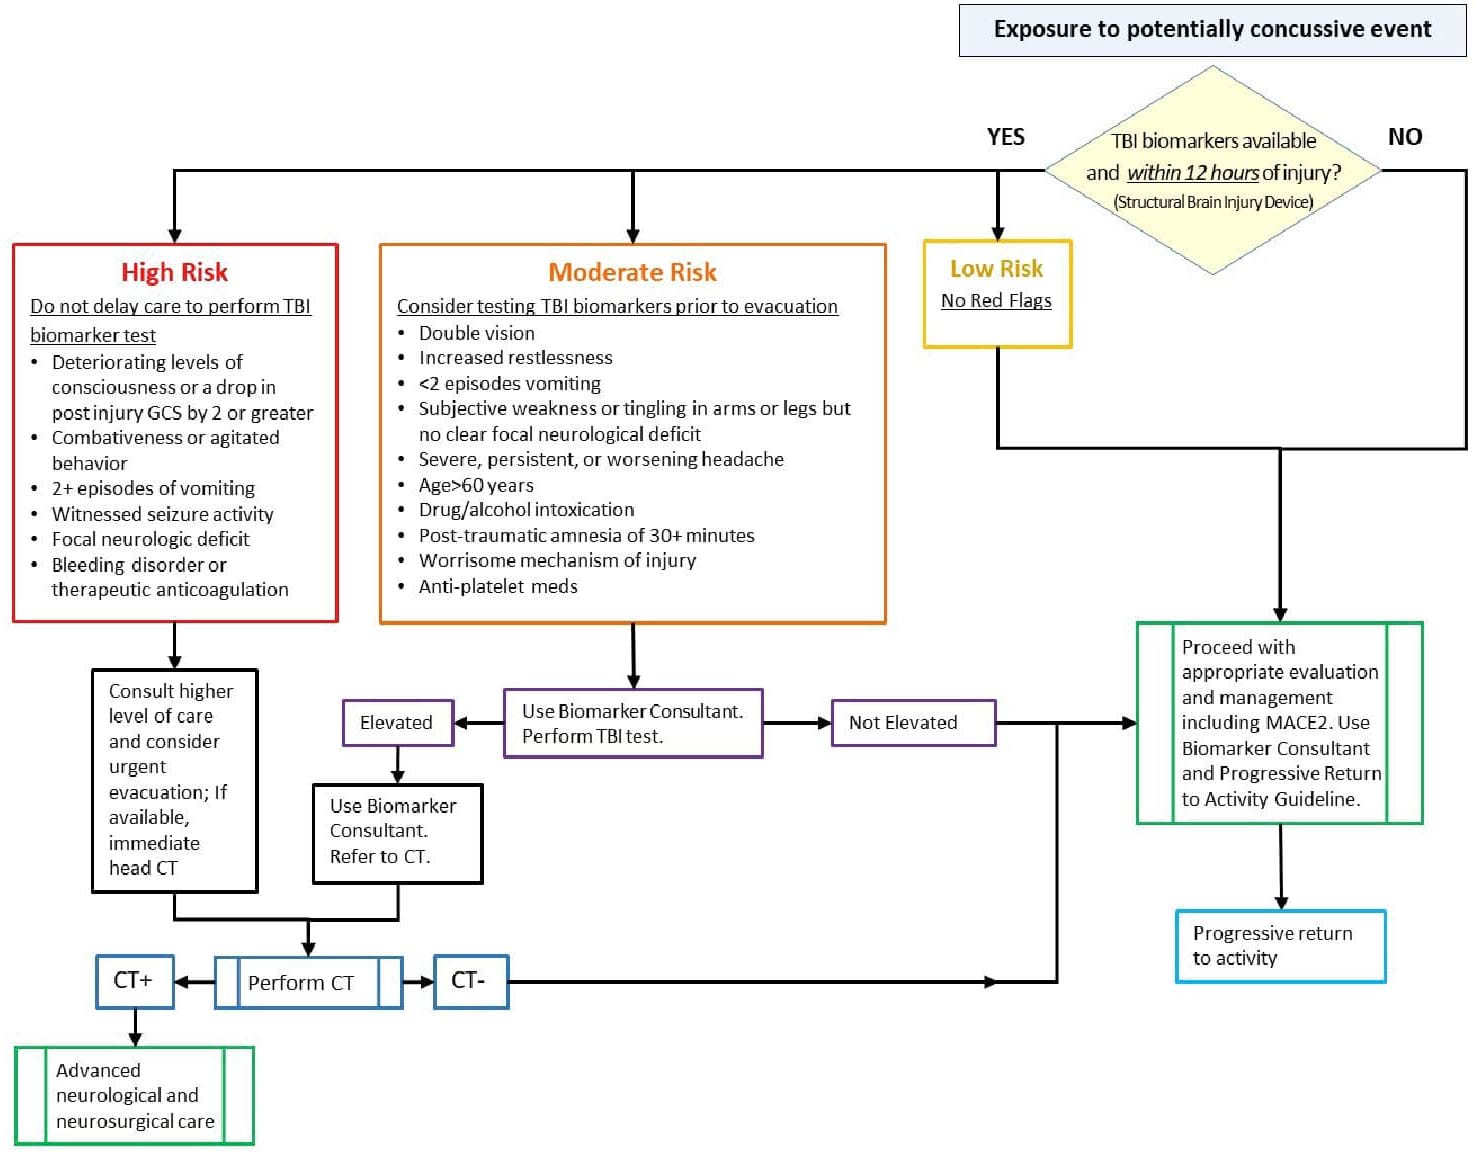 Clinical Algorithm for TBI Blood Biomarkers Use